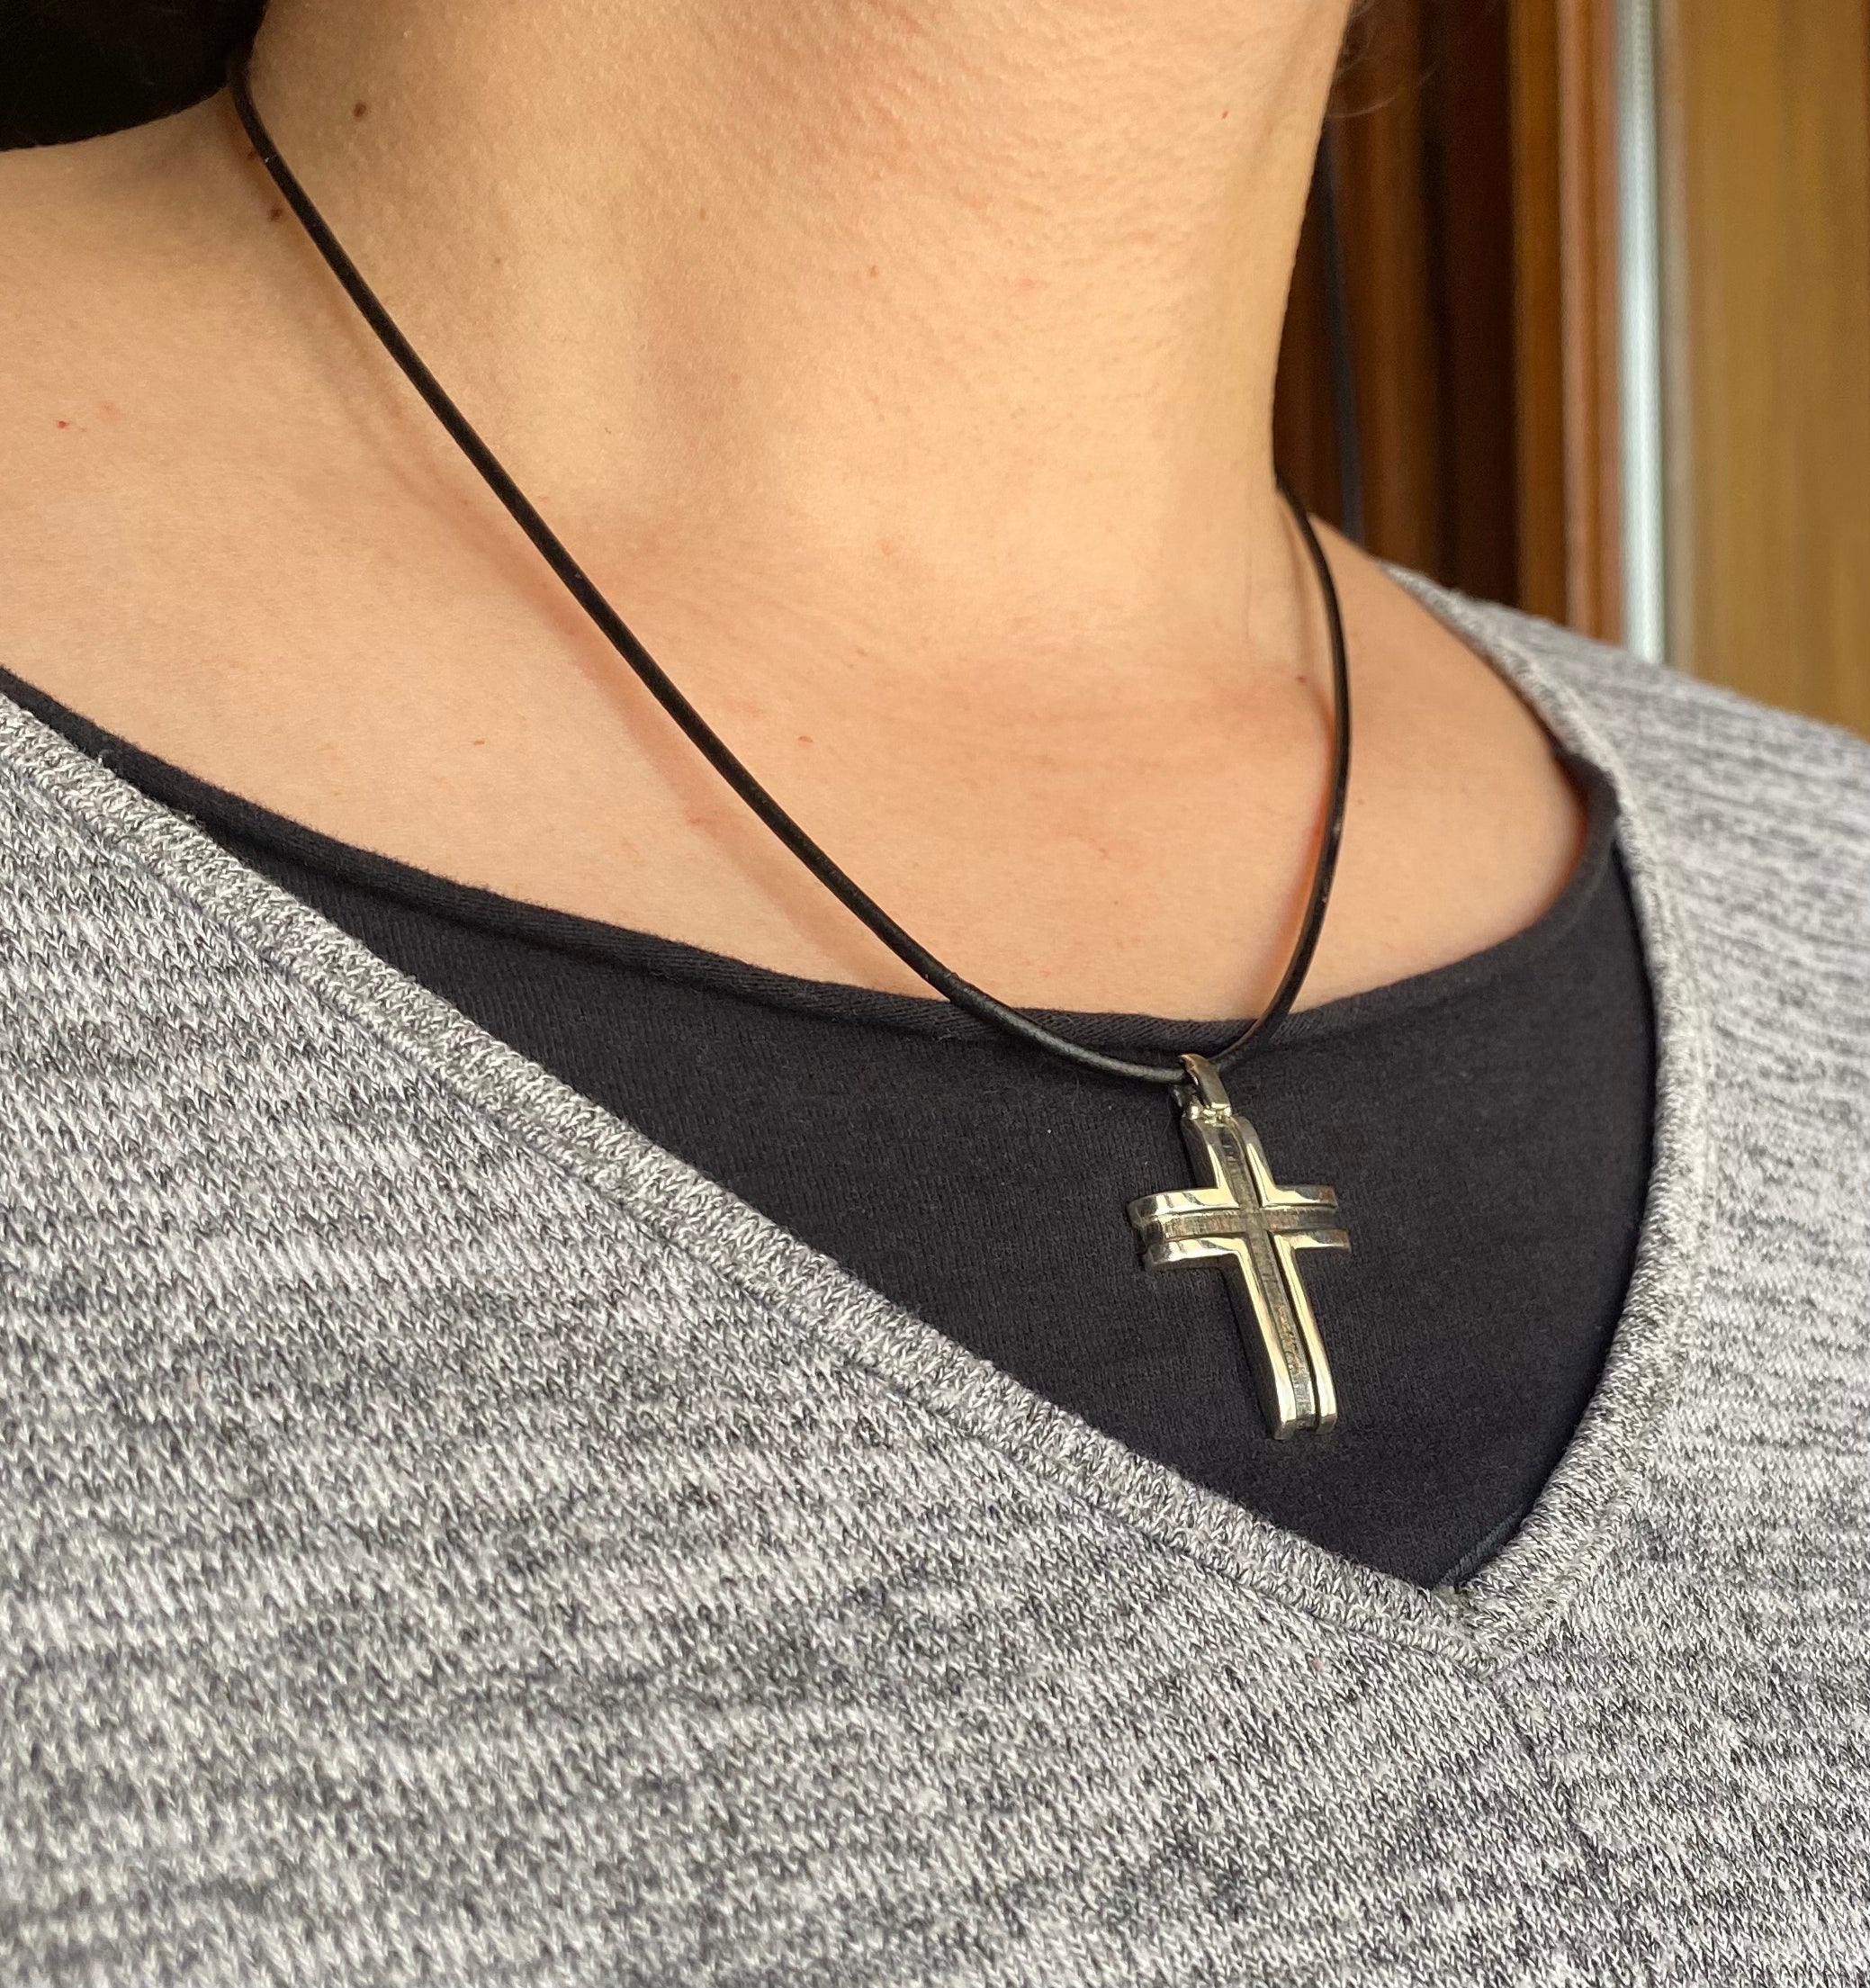 Stainless Steel Small Cross Necklace Black String